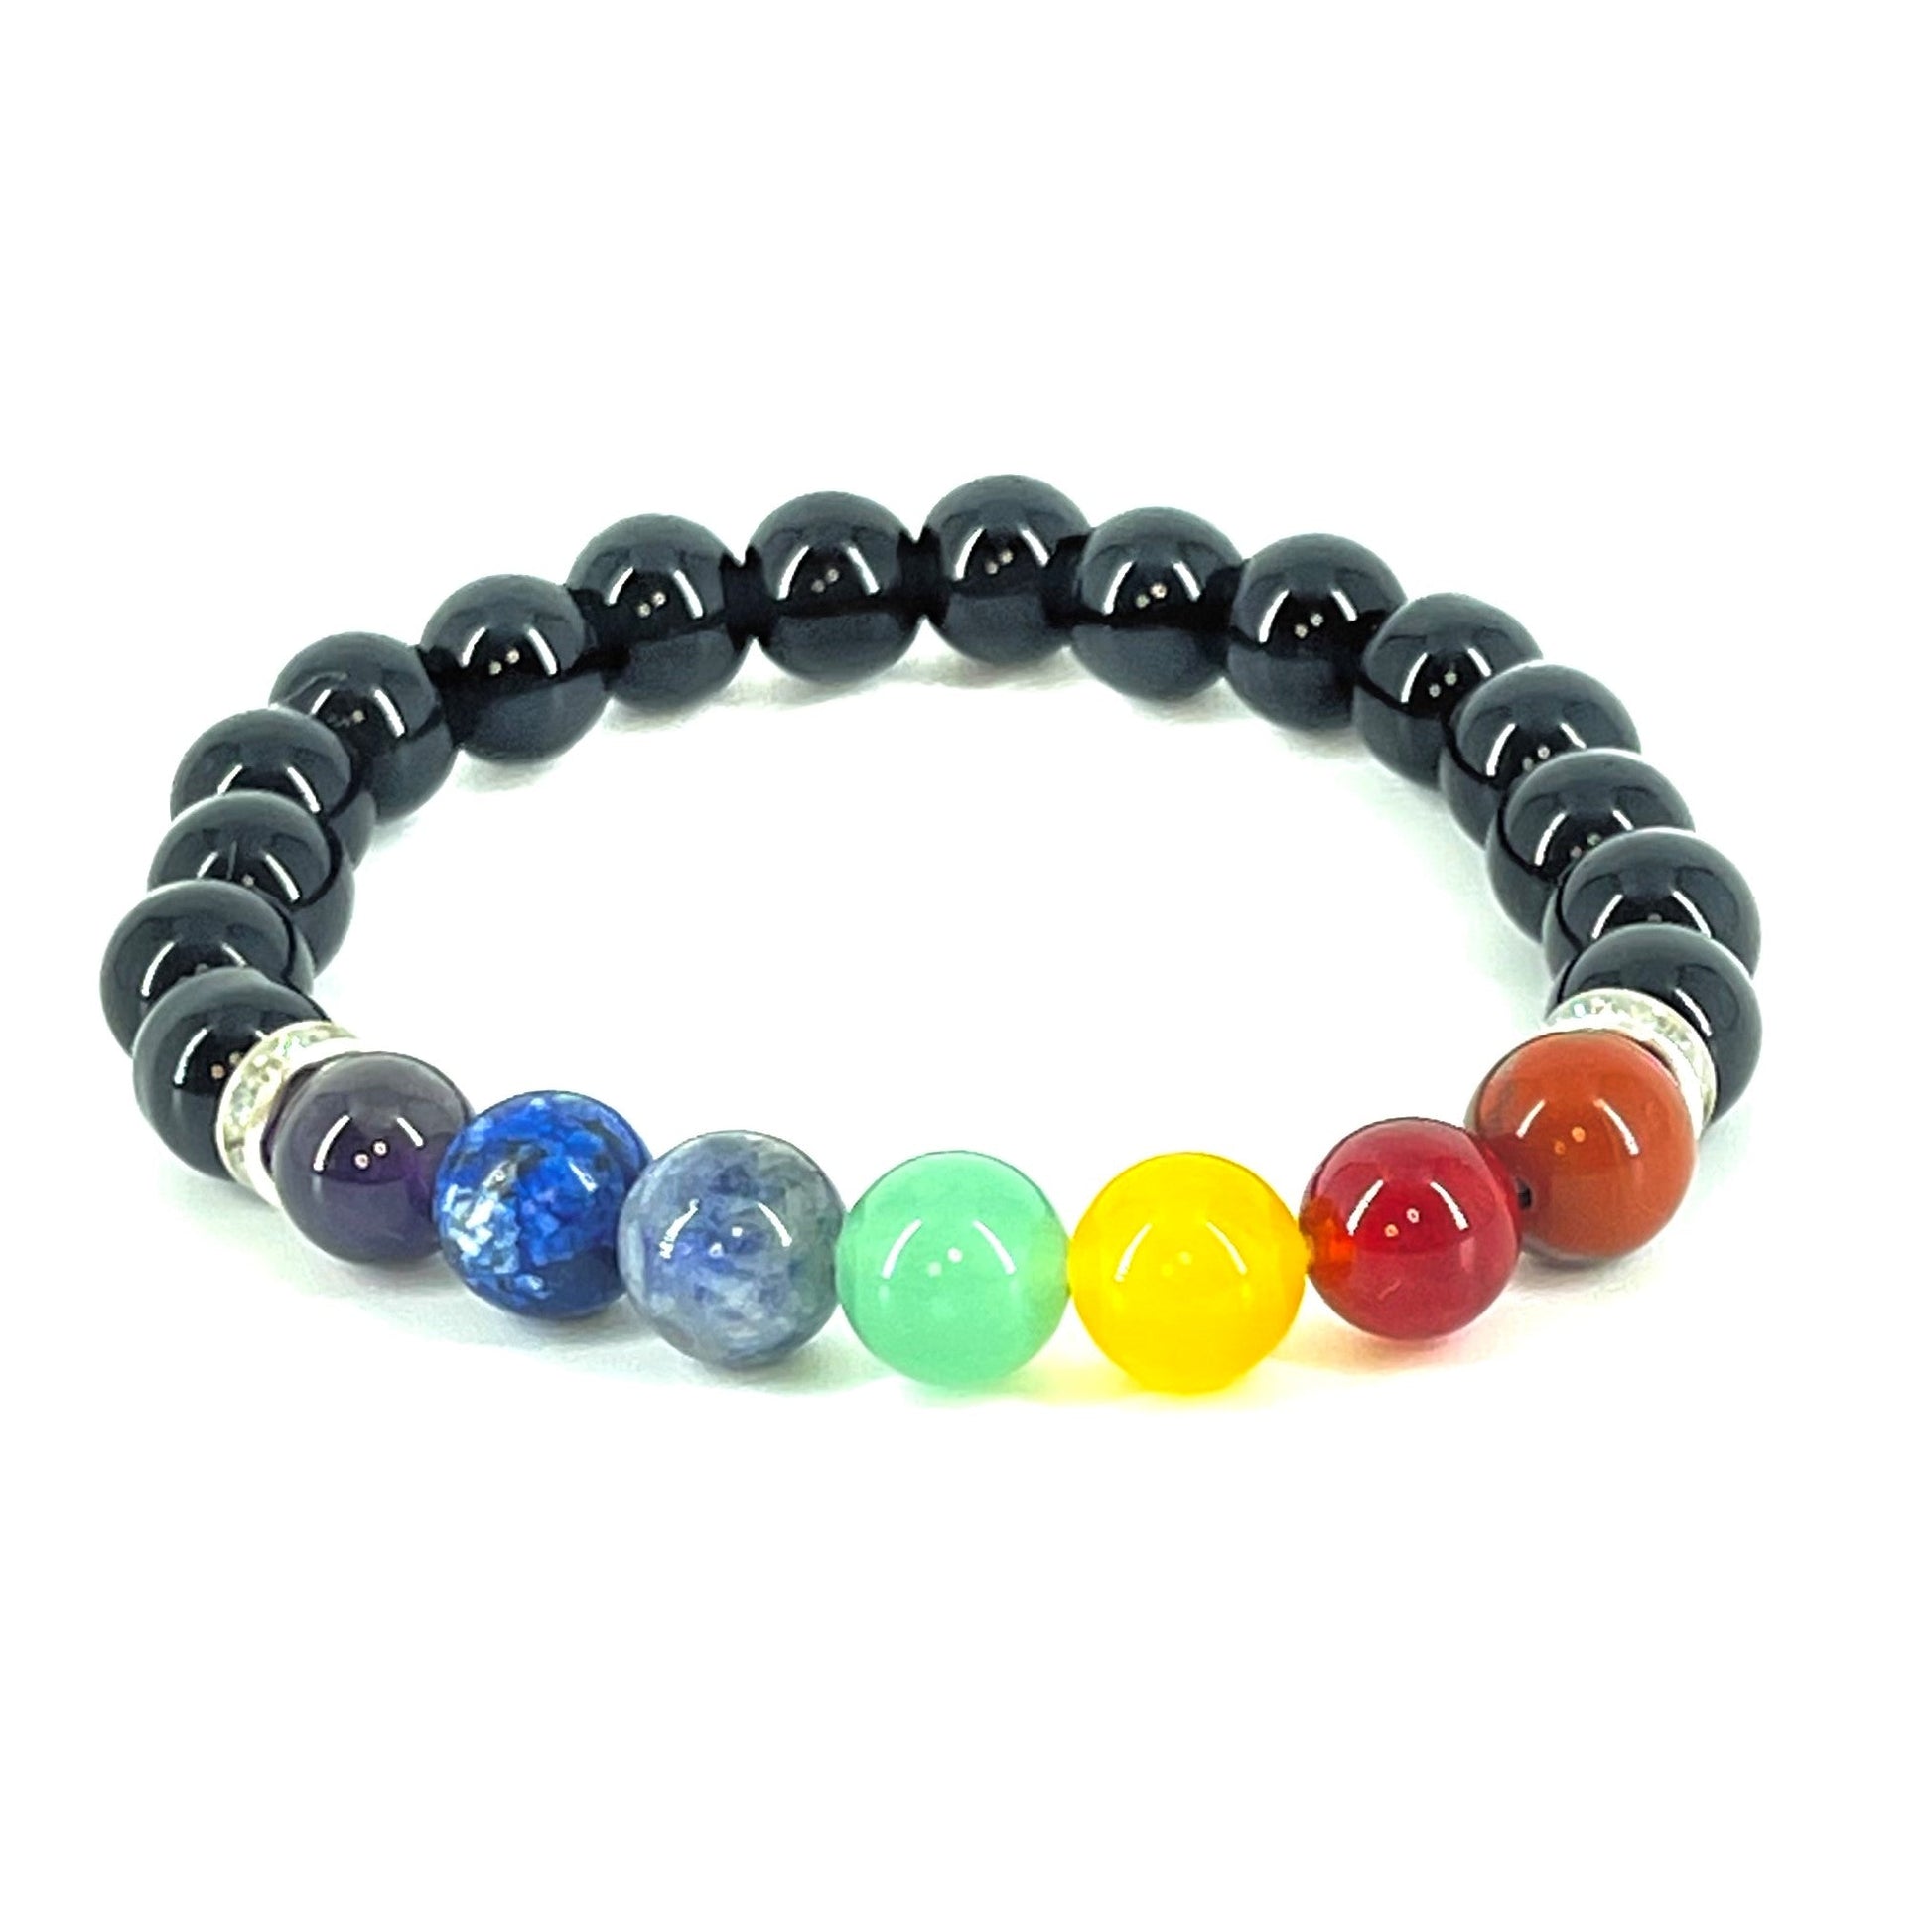 Natural Obsidian Beads with Chakra Crystal Stones Bracelet Stones Crystal Shop